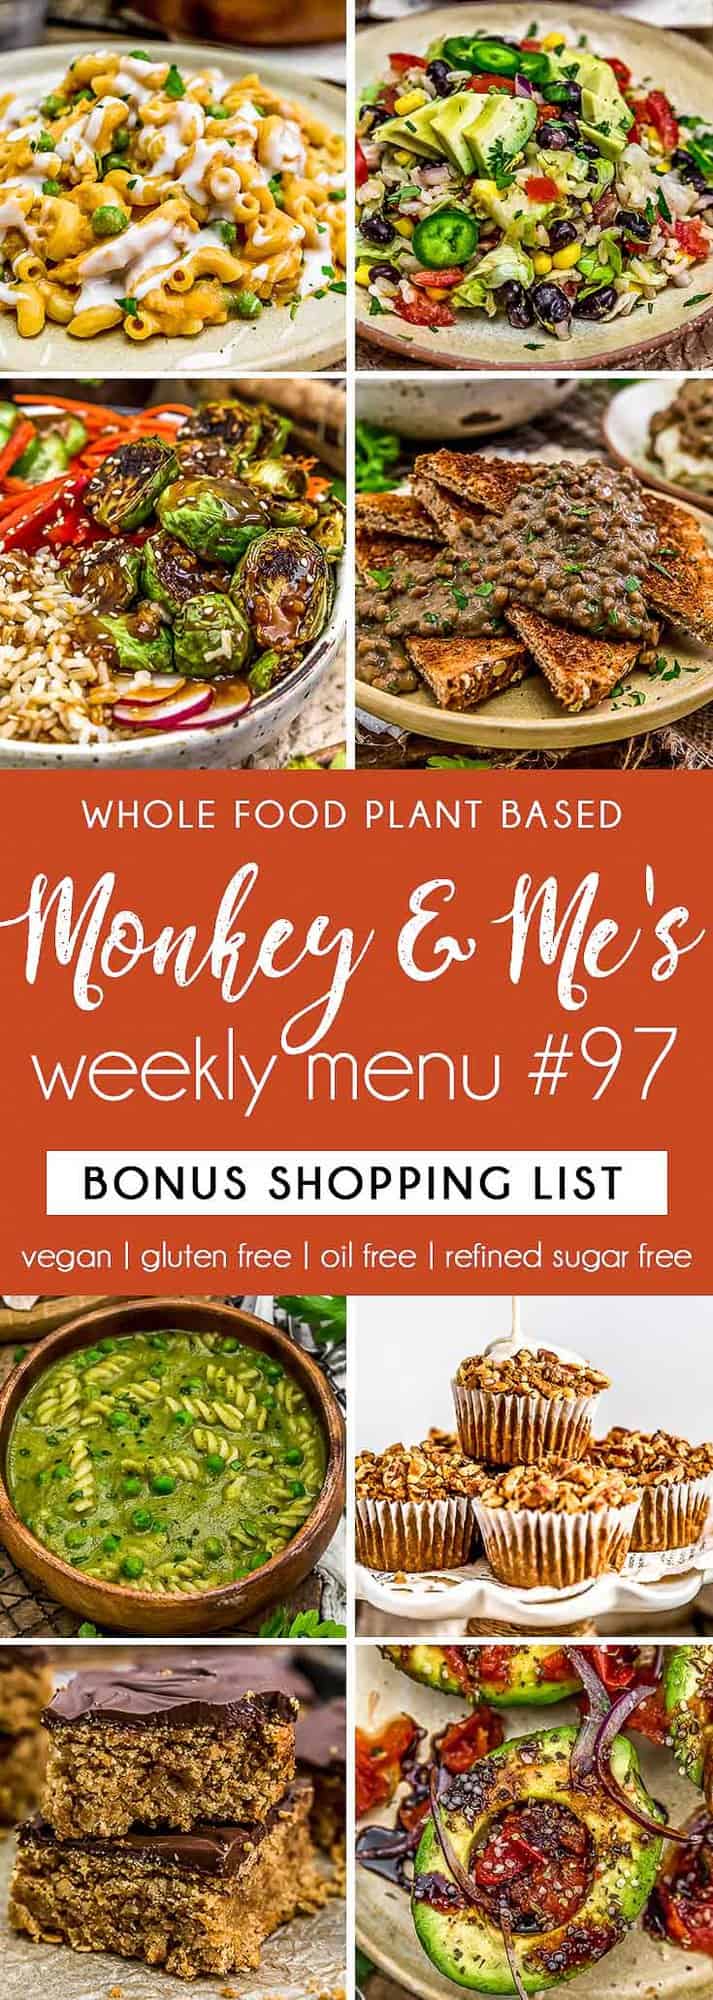 Monkey and Me's Menu 97 featuring 8 recipes